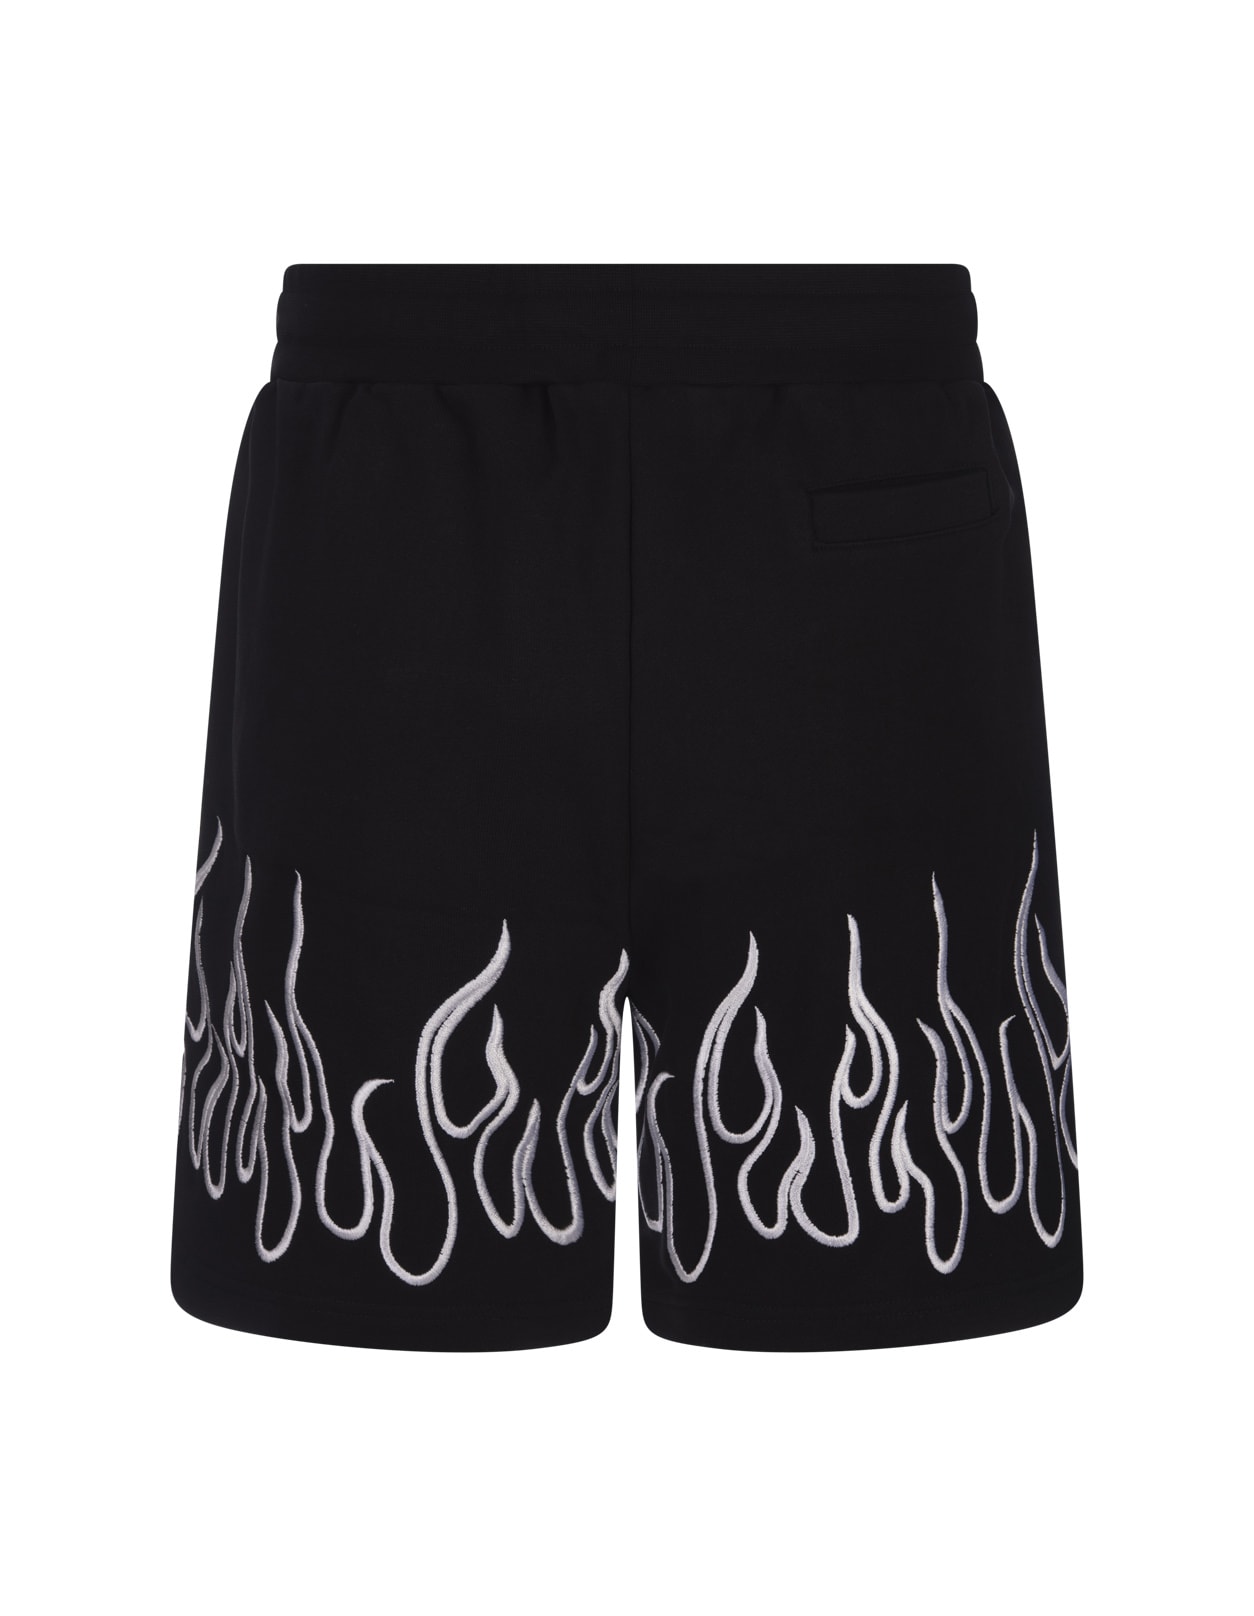 Shop Vision Of Super Black Shorts With Embroidered White Flames